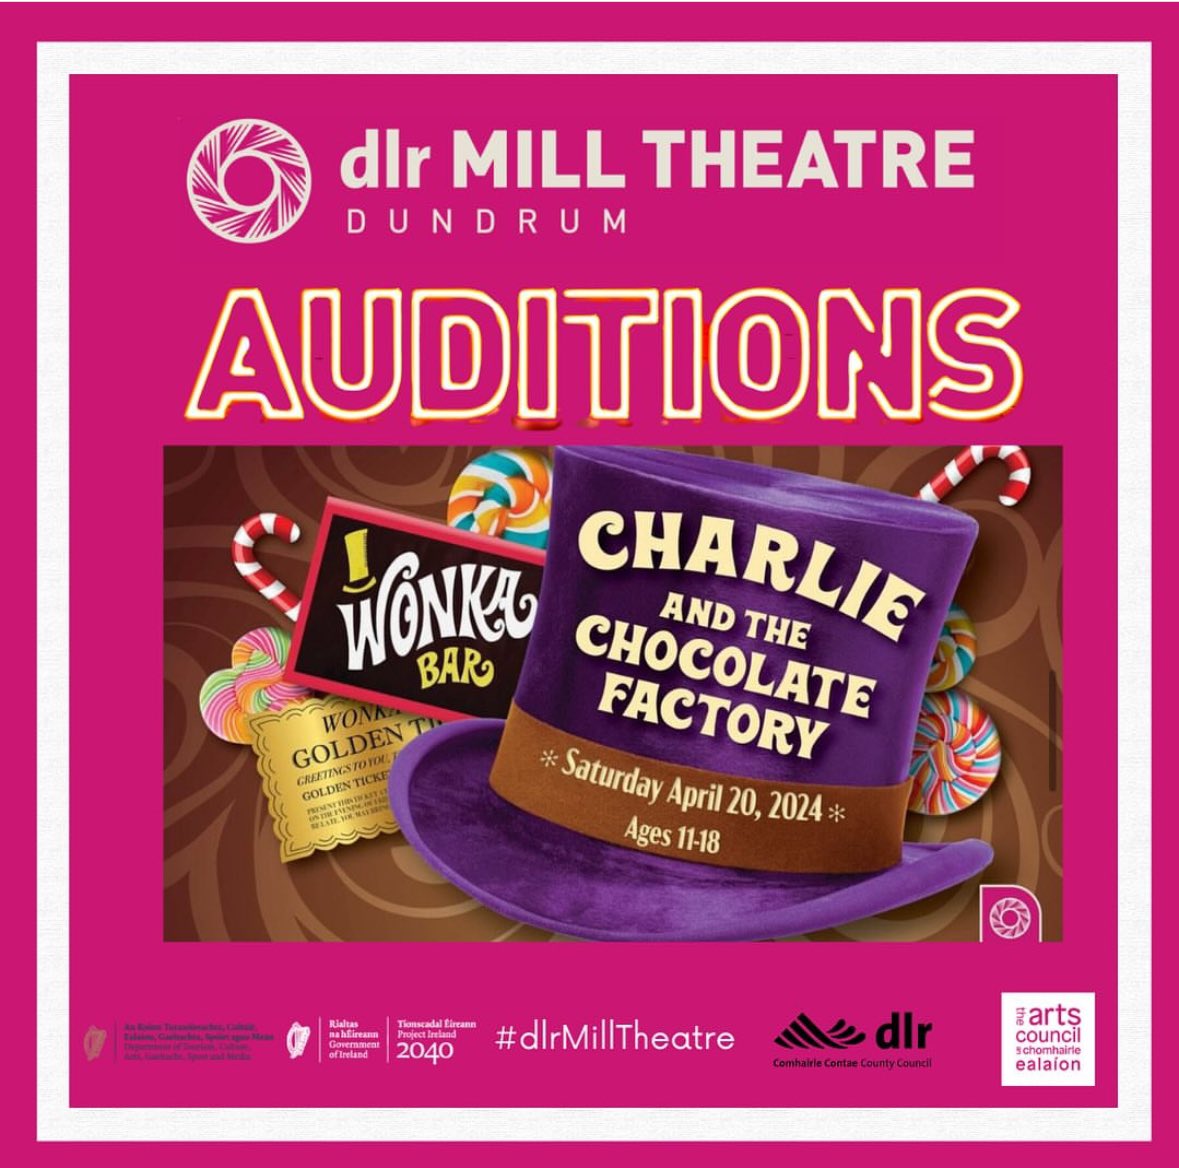 ‼️Application deadline tomorrow ‼️ ✨ We are looking for ANYONE aged 11-18 who loves theatre and who has guts, determination, integrity, ambition, energy, authenticity, generosity and a willingness to give it everything! ✨ Find out more: milltheatre.ie/events/mill-yo…